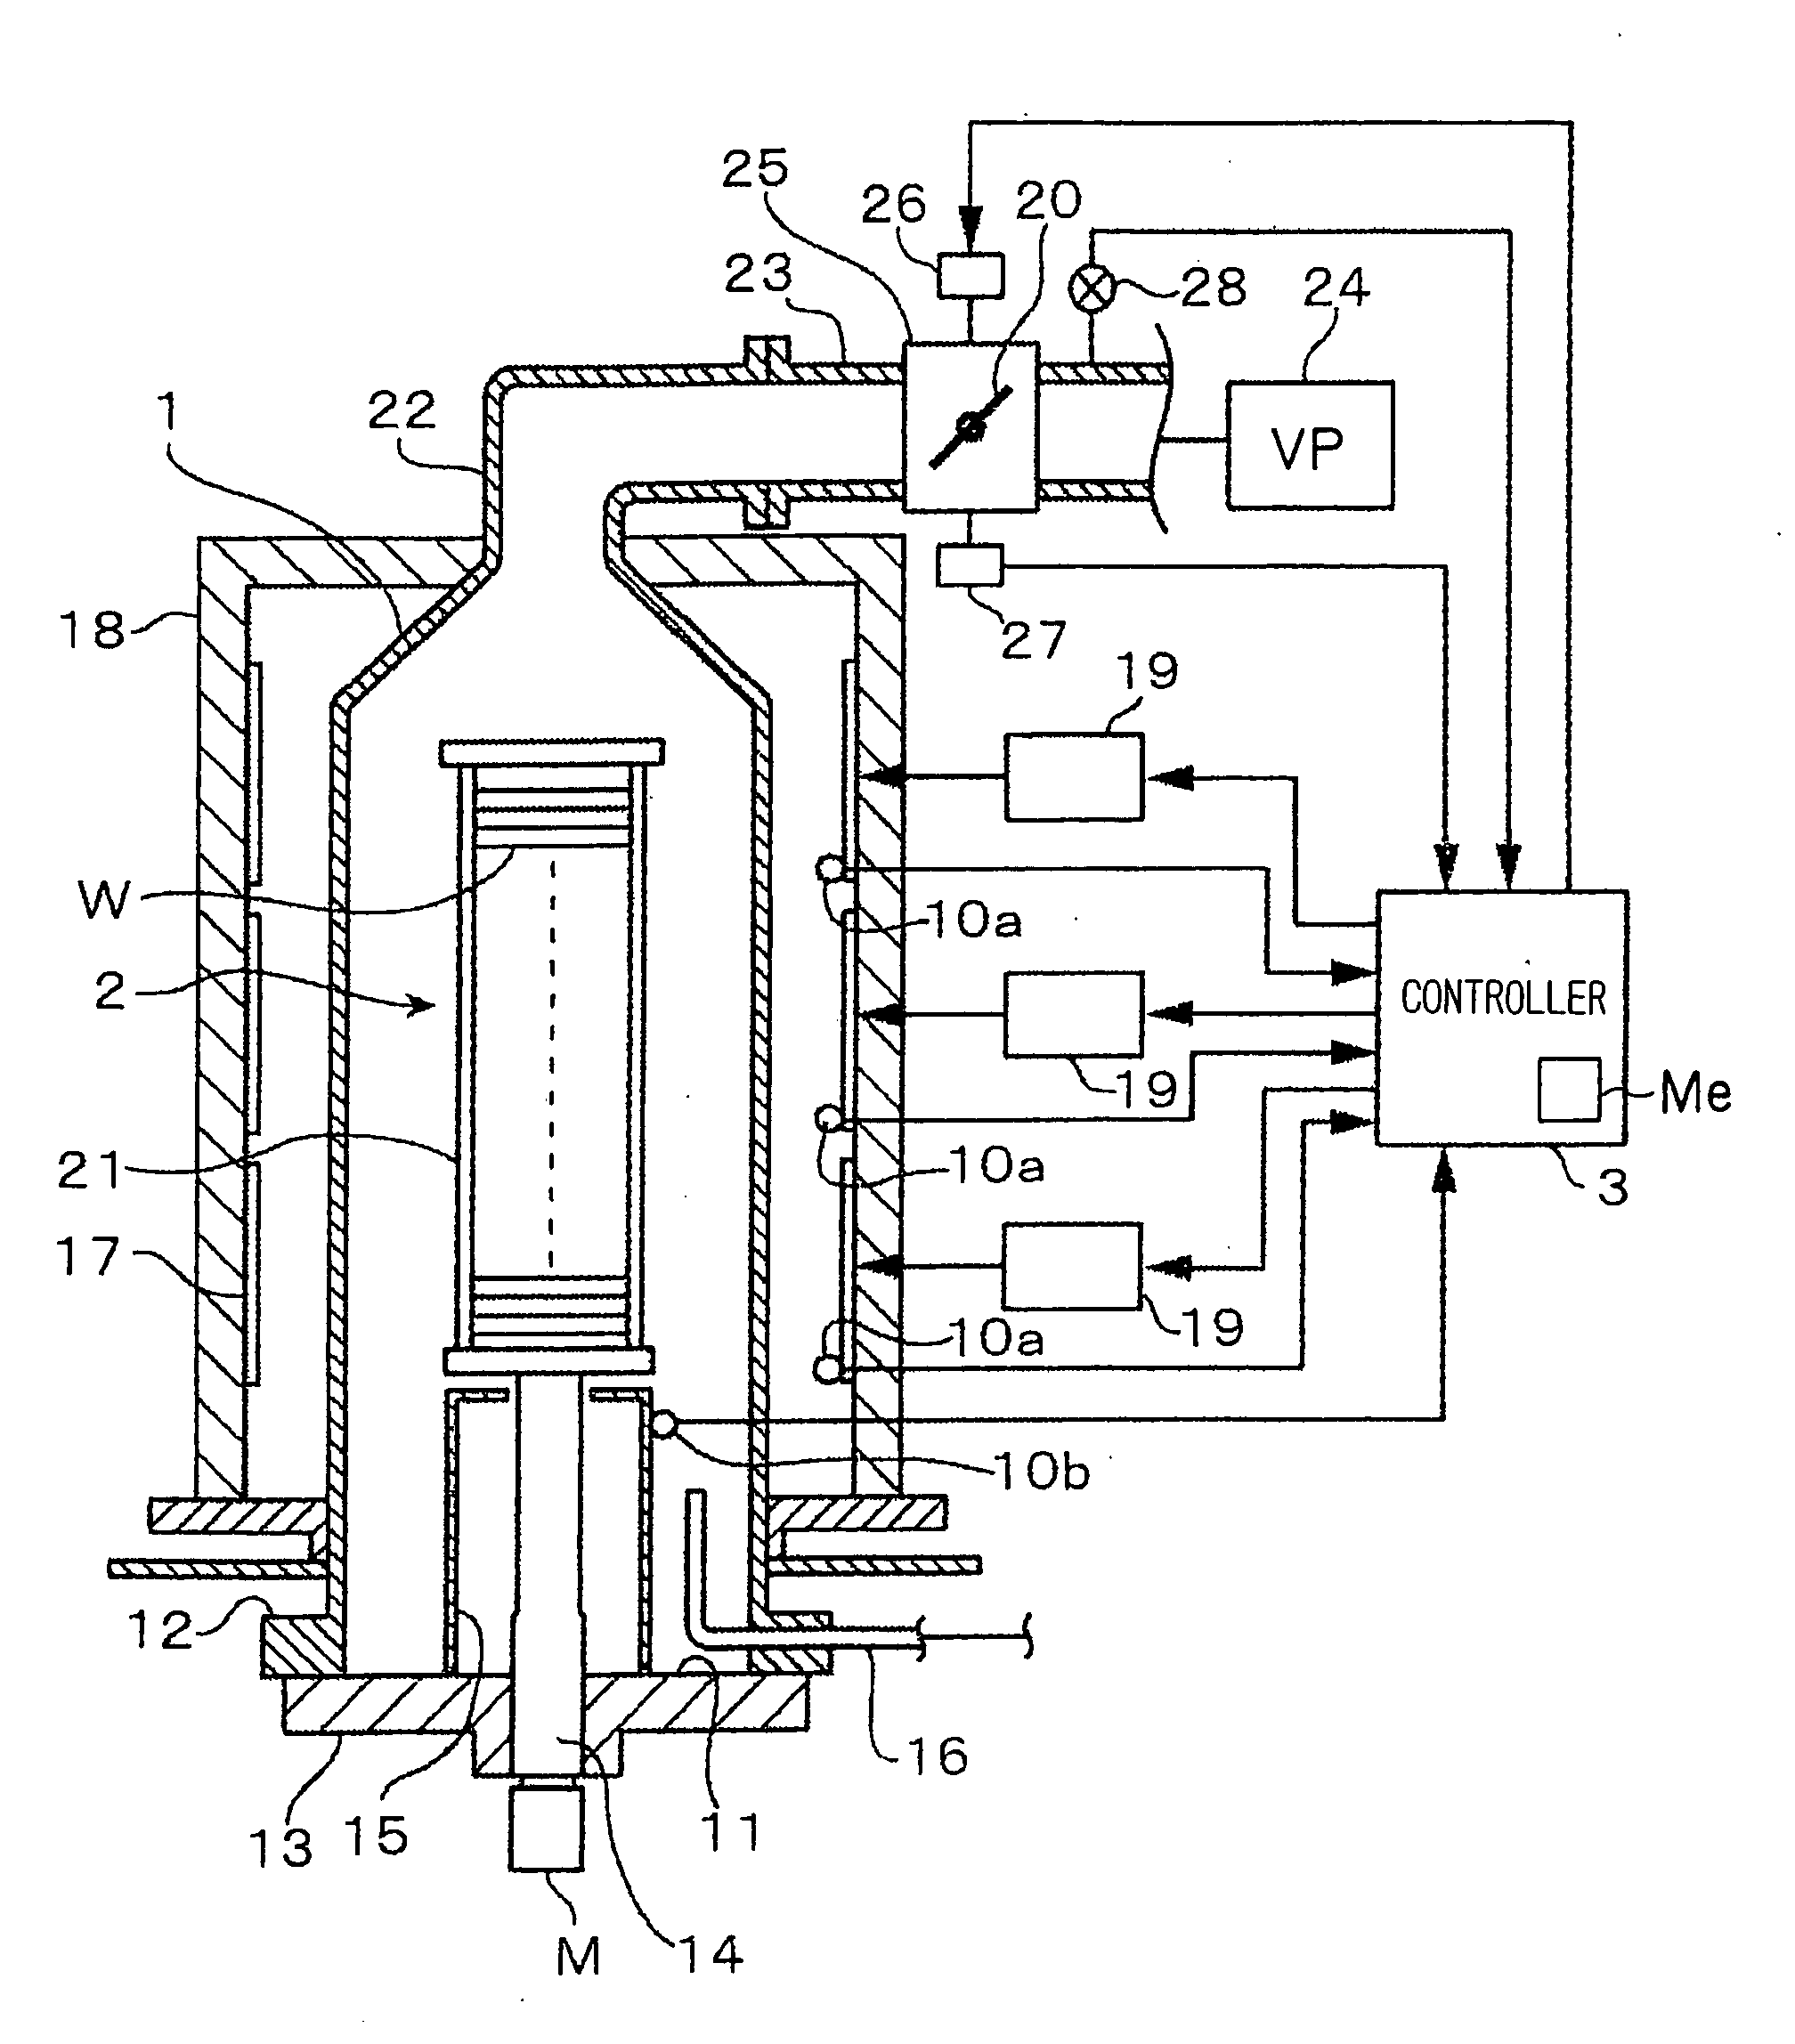 Semiconductor Manufacturing Apparatus, Method of Detecting Abnormality, Identifying Cause of Abnormality, or Predicting Abnormality in the Semiconductor Manufacturing Apparatus, and Storage Medium Storing Computer Program for Performing the Method